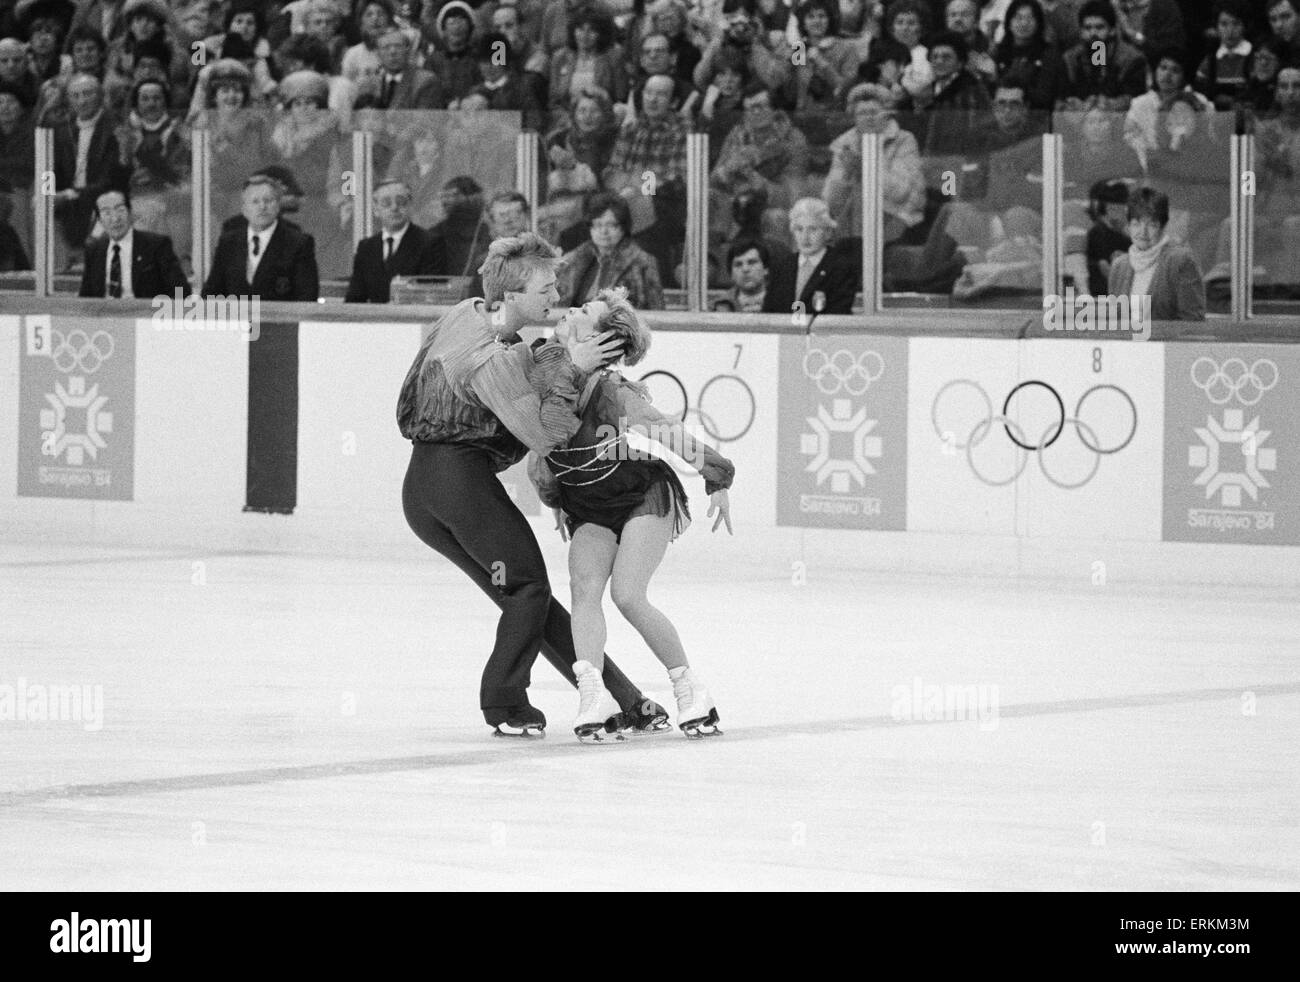 Great Britain's Jayne Torvill and Christopher Dean kiss during their famous 'Bolero' routine at the Zetra Stadium in the 1984 Winter Olympic Games in Sarajevo, Yugoslavia. The team racked up an unprecedented 12 perfect scores to win the gold medal for this performance. 14th February 1984. Stock Photo